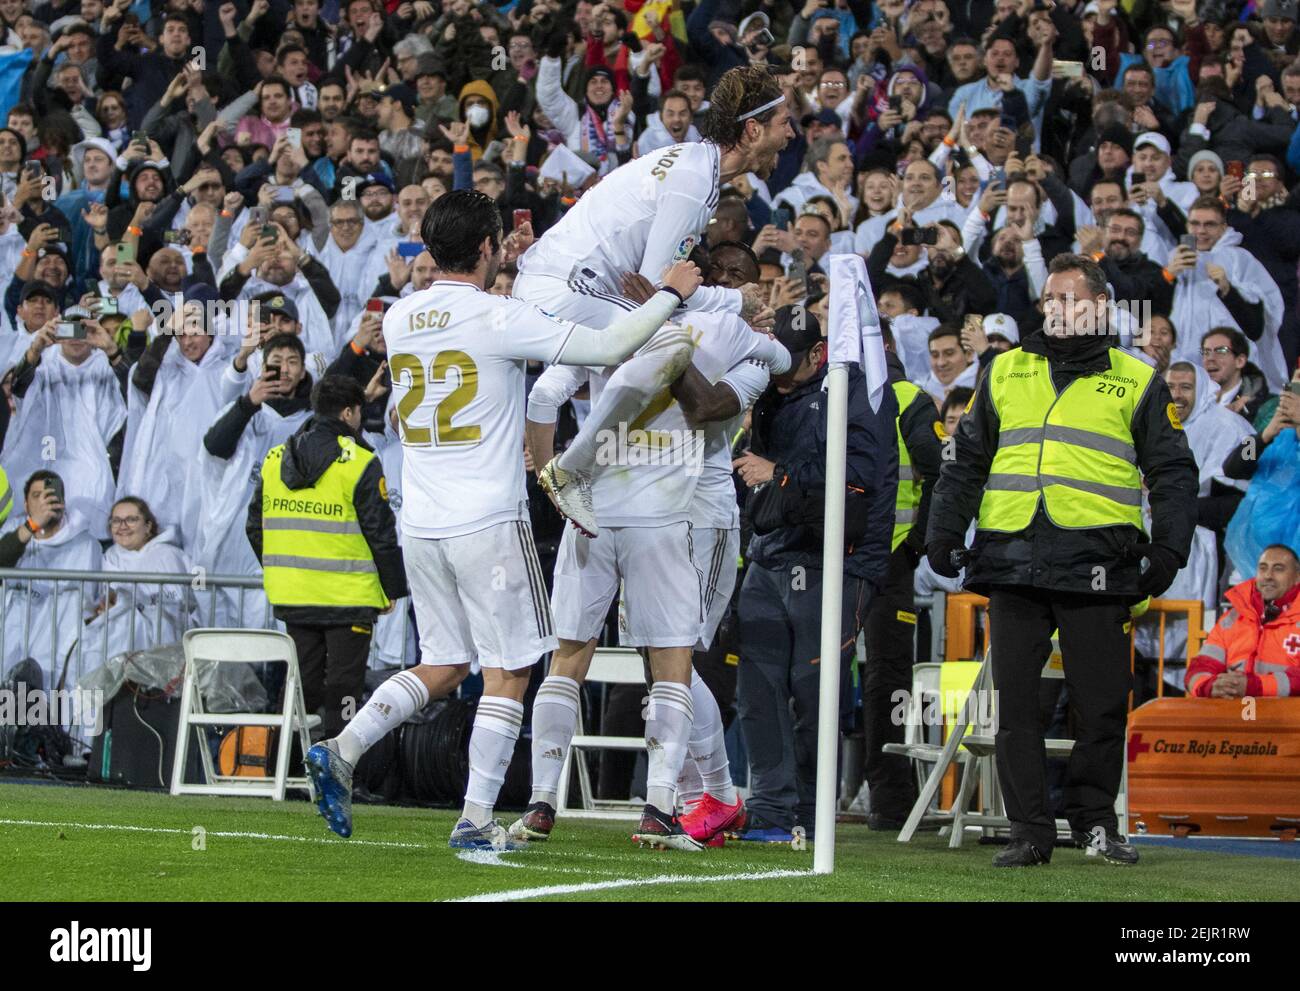 Real Madrid team players celebrate a goal during the Spanish La Liga match  round 26 between Real Madrid and FC Barcelona at Santiago Bernabeu Stadium  in Madrid. Final score: Real Madrid 2-0